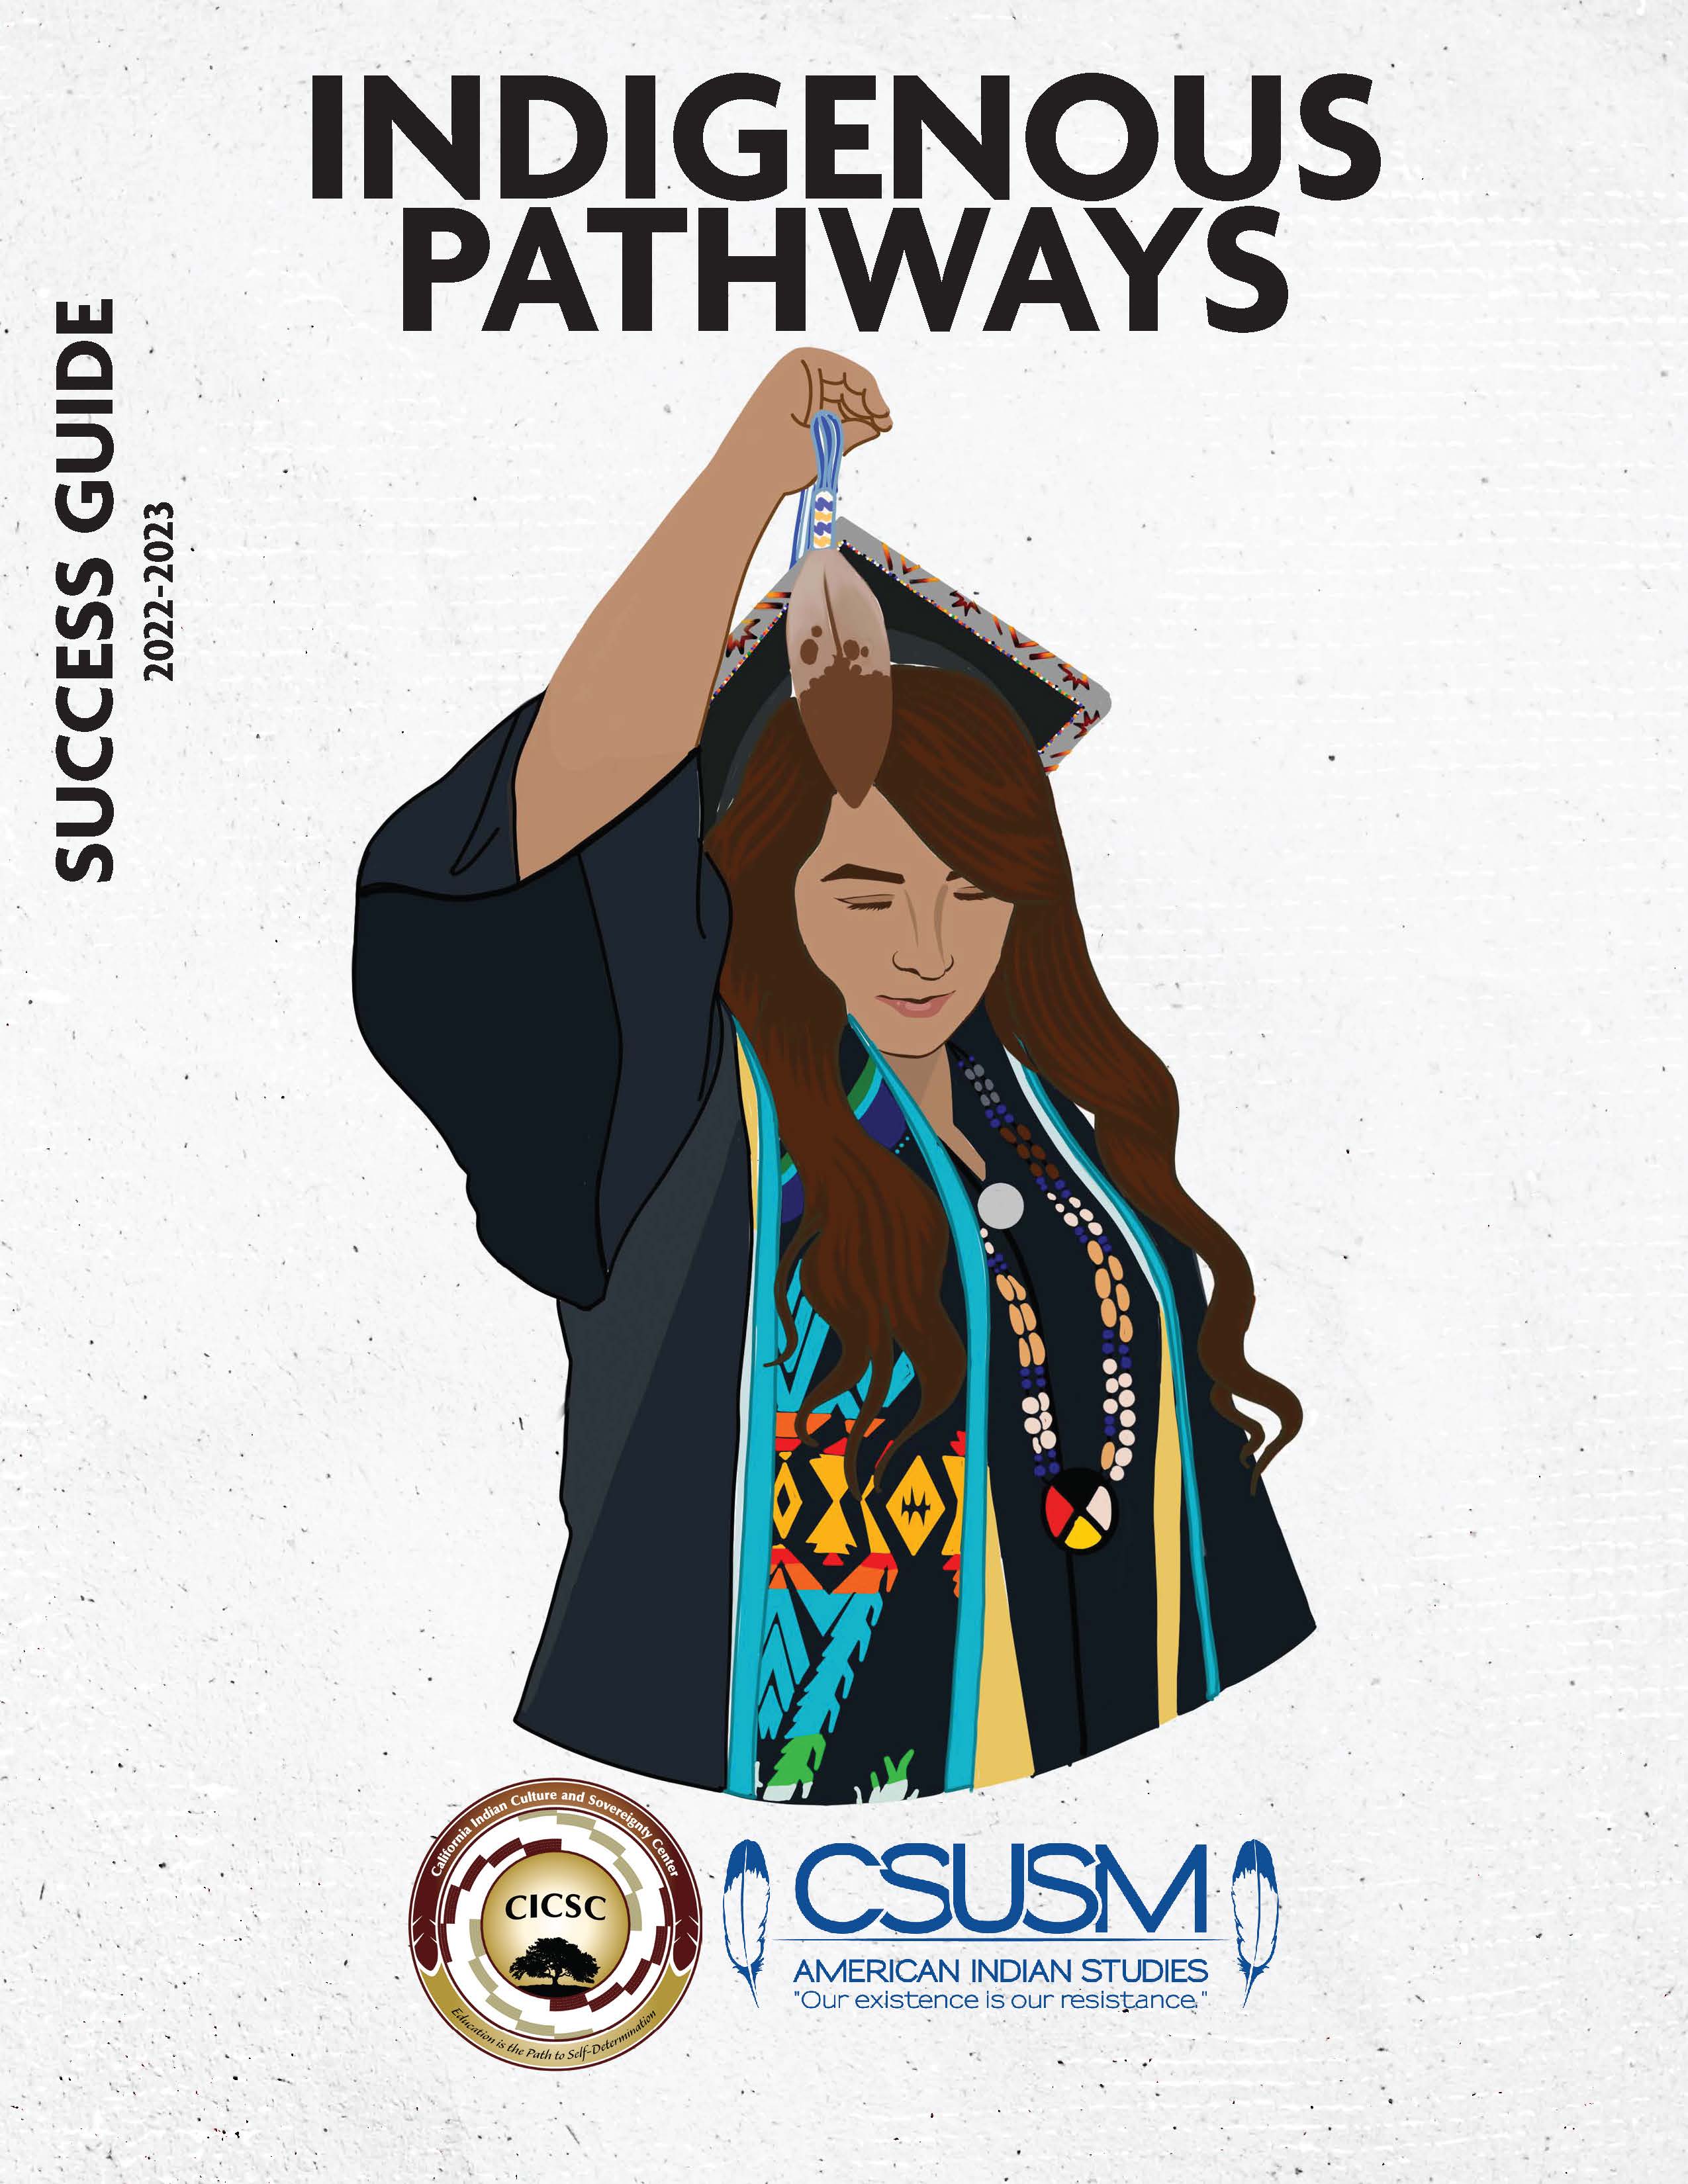 Cover for the Indiegnous Pathways Success Guide